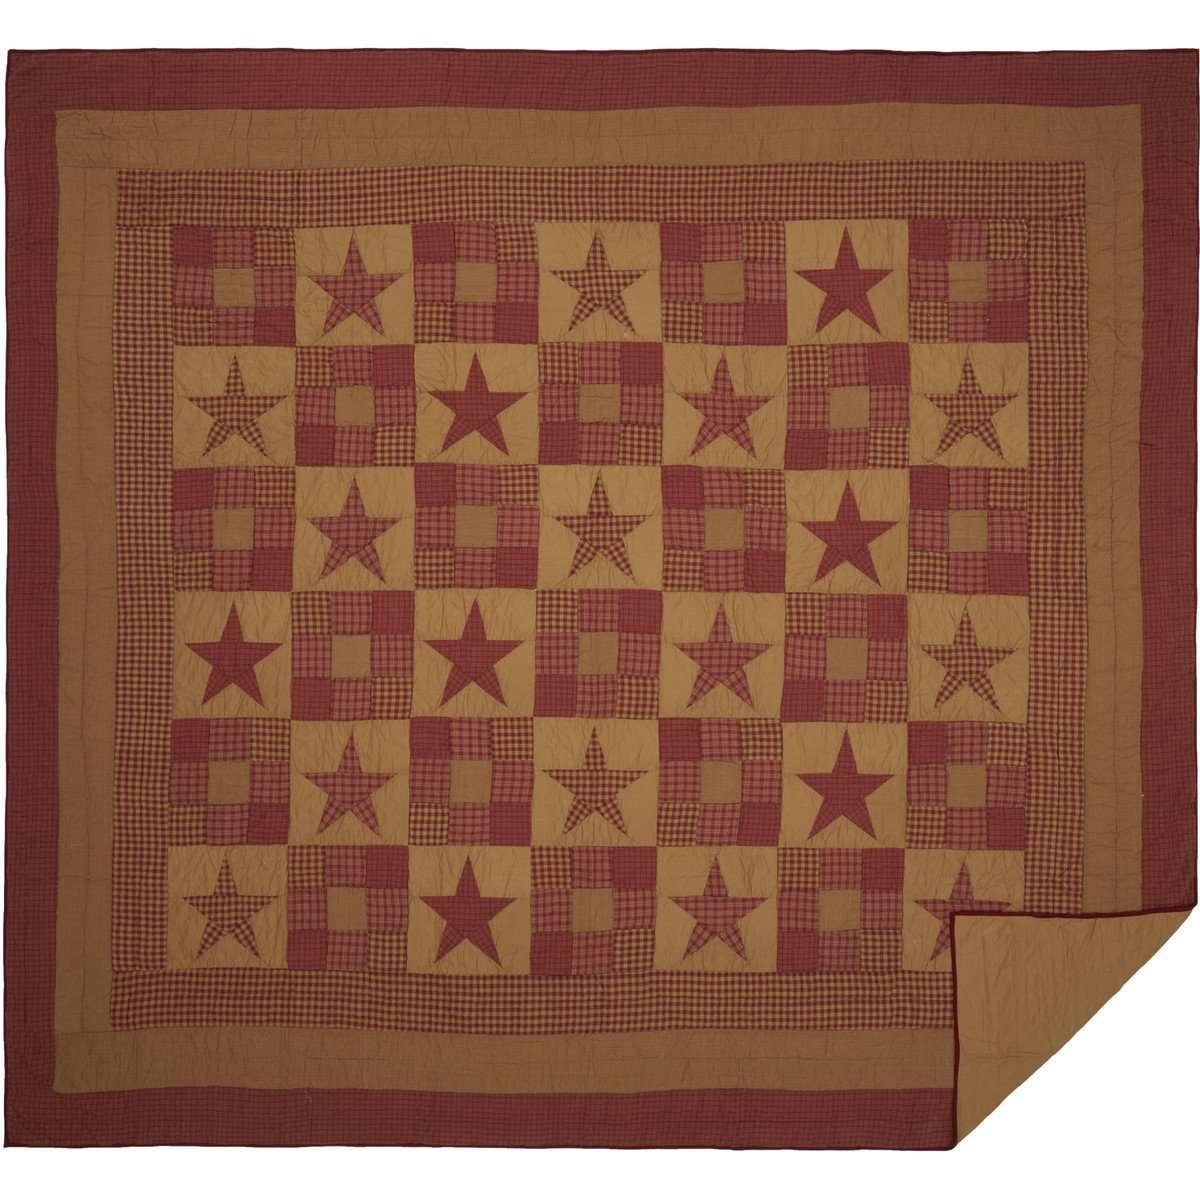 Ninepatch Star Luxury King Quilt 120Wx105L VHC Brands full